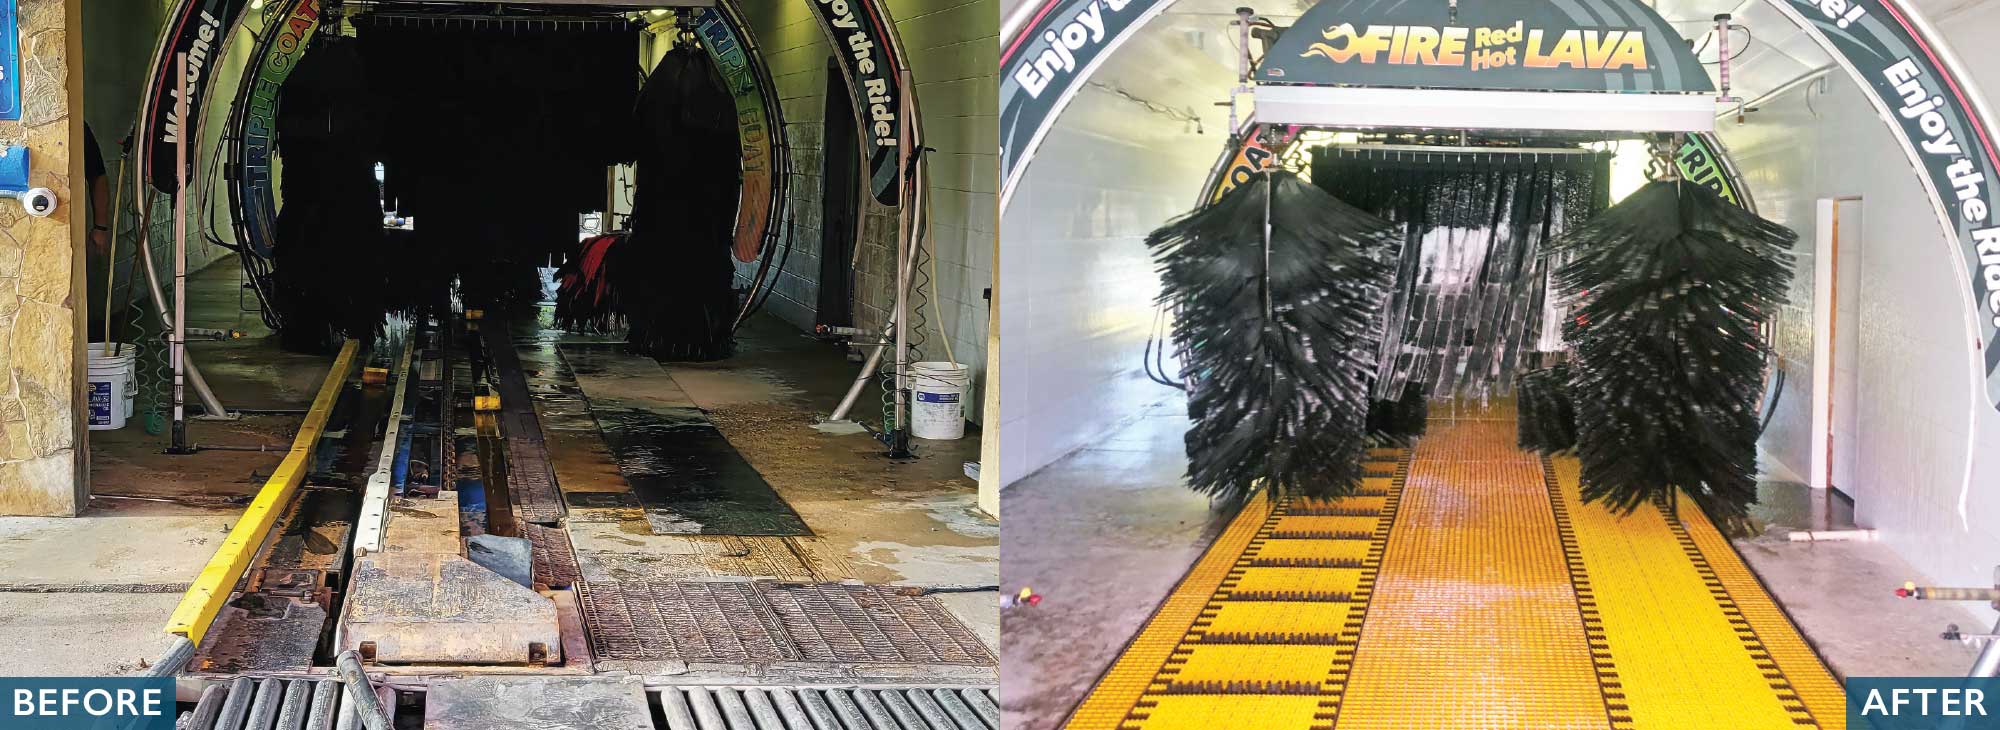 belt conveyor before and after